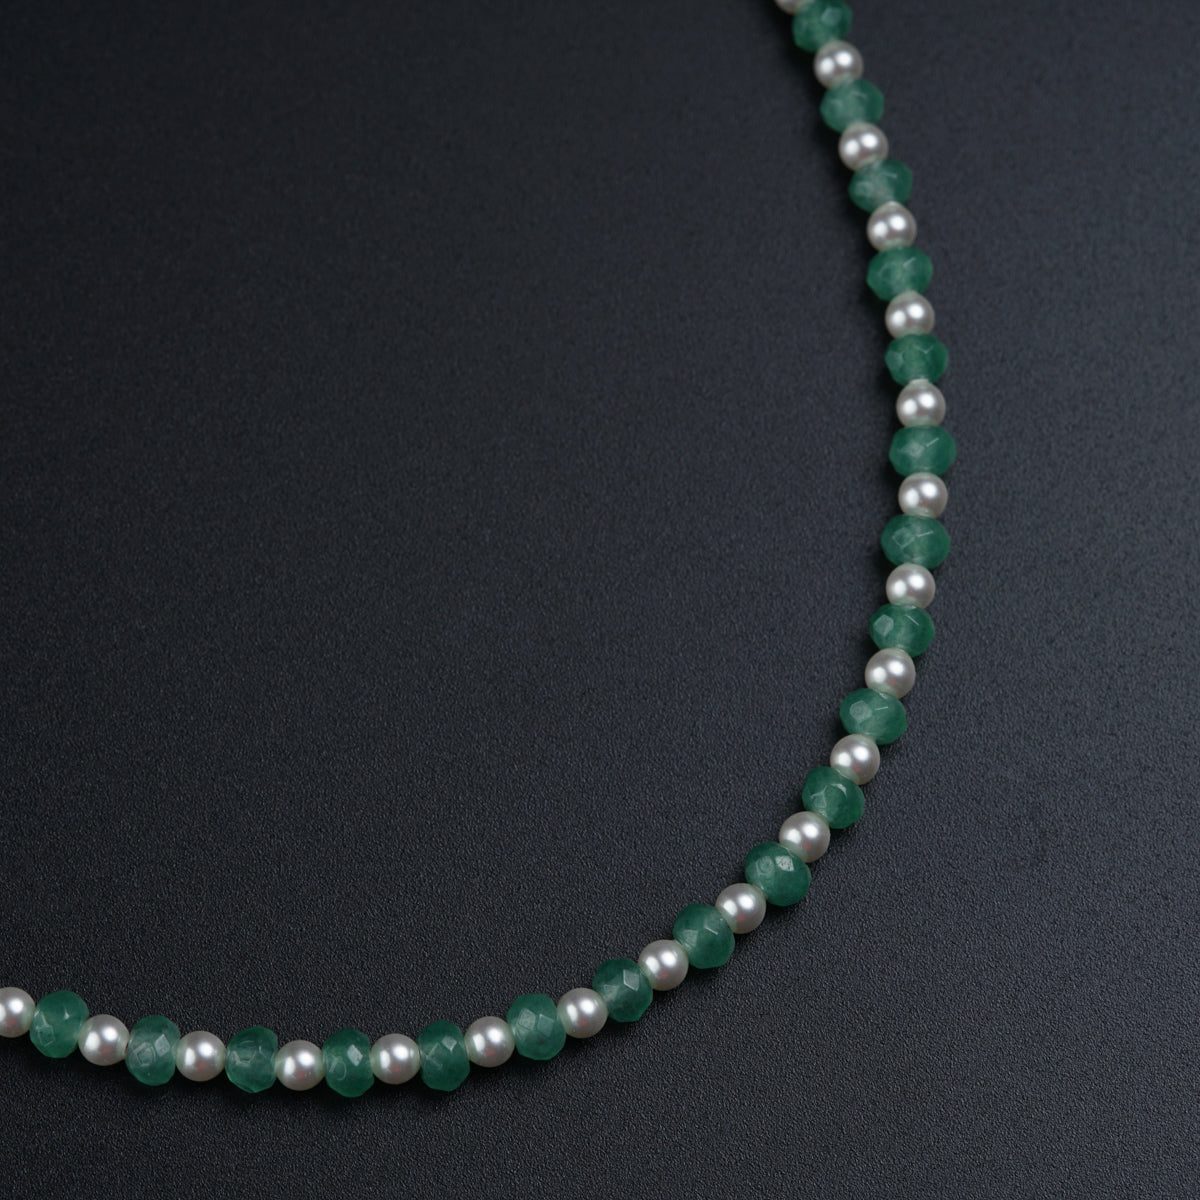 a beaded necklace with a green and white bead